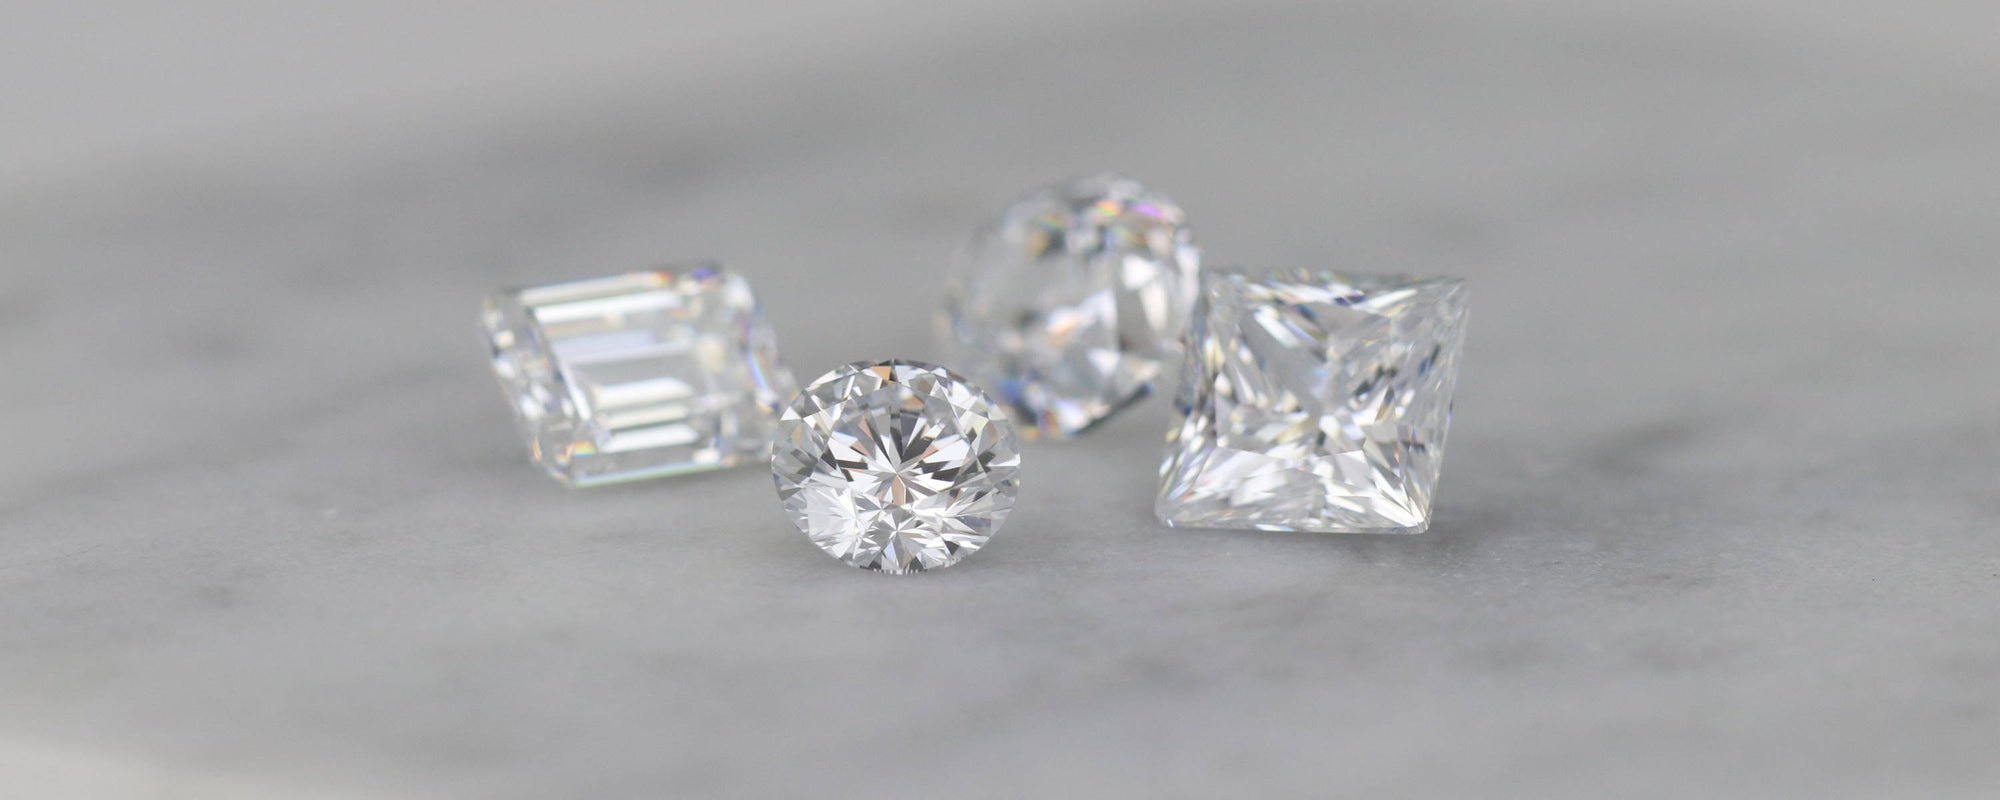 What is the Resale Value of a Lab Grown Diamond?